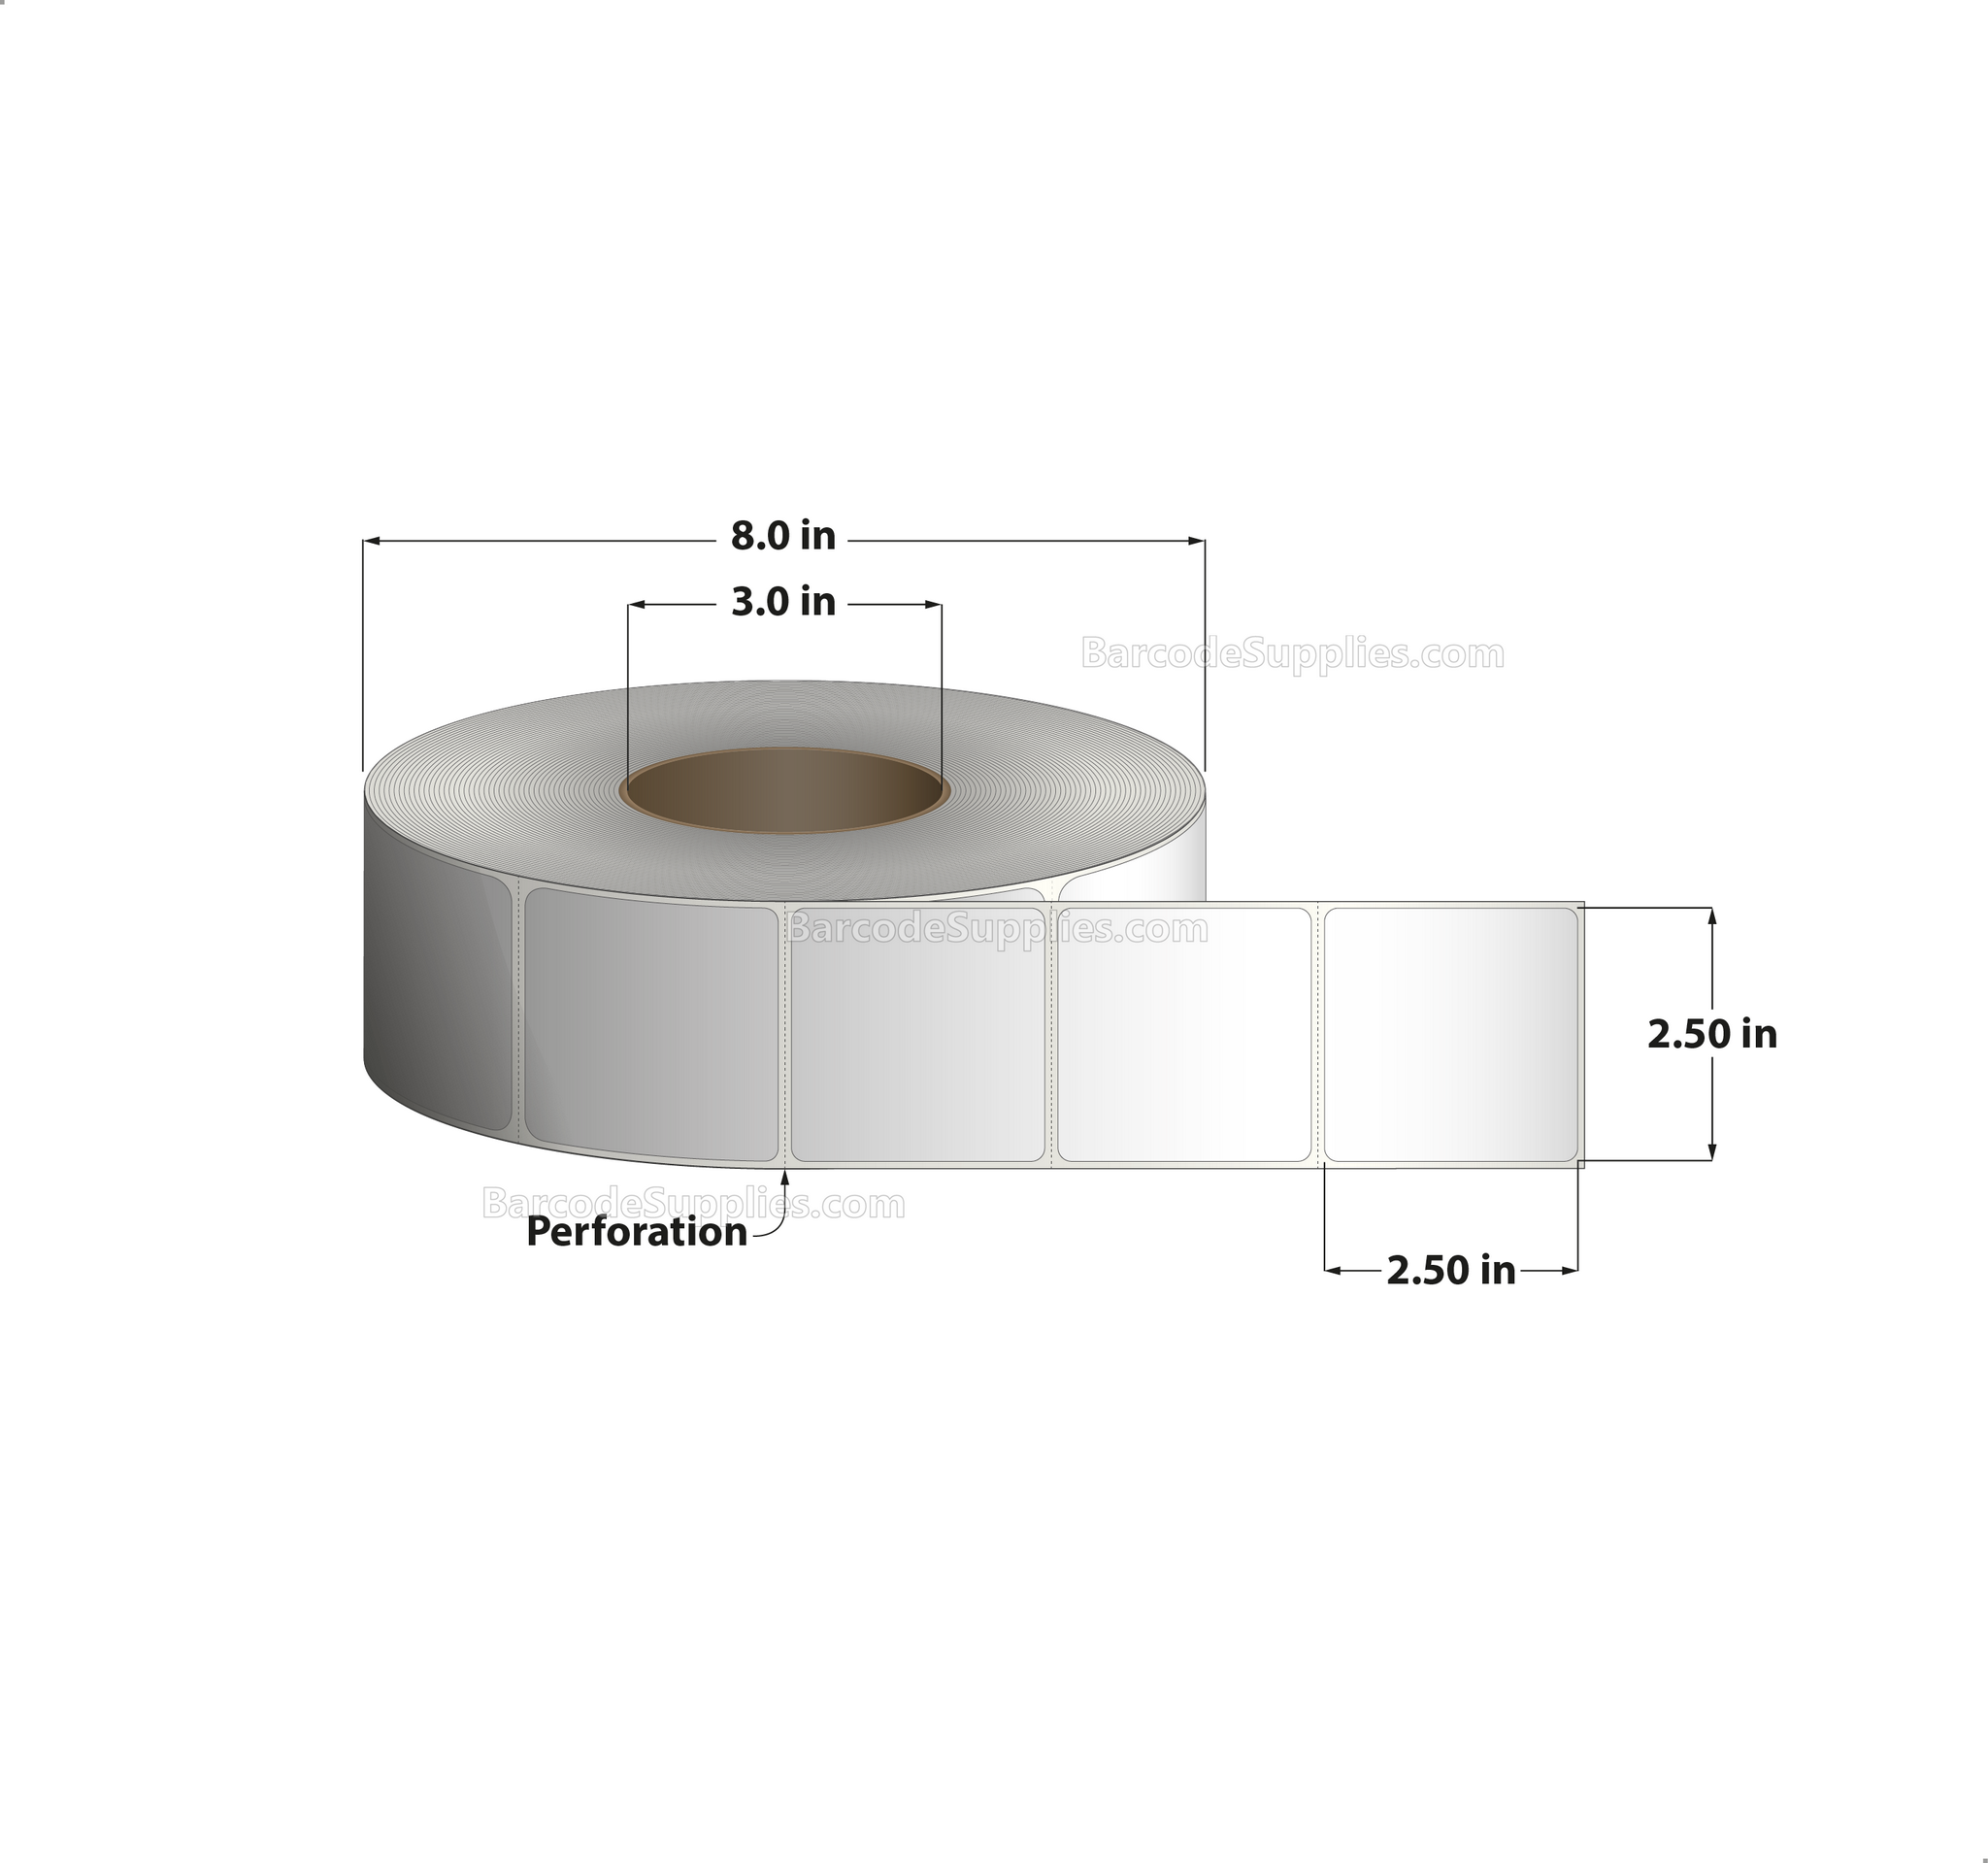 2.5 x 2.5 Thermal Transfer White Labels With Permanent Adhesive - Perforated - 2500 Labels Per Roll - Carton Of 8 Rolls - 20000 Labels Total - MPN: RT-25-25-2500-3